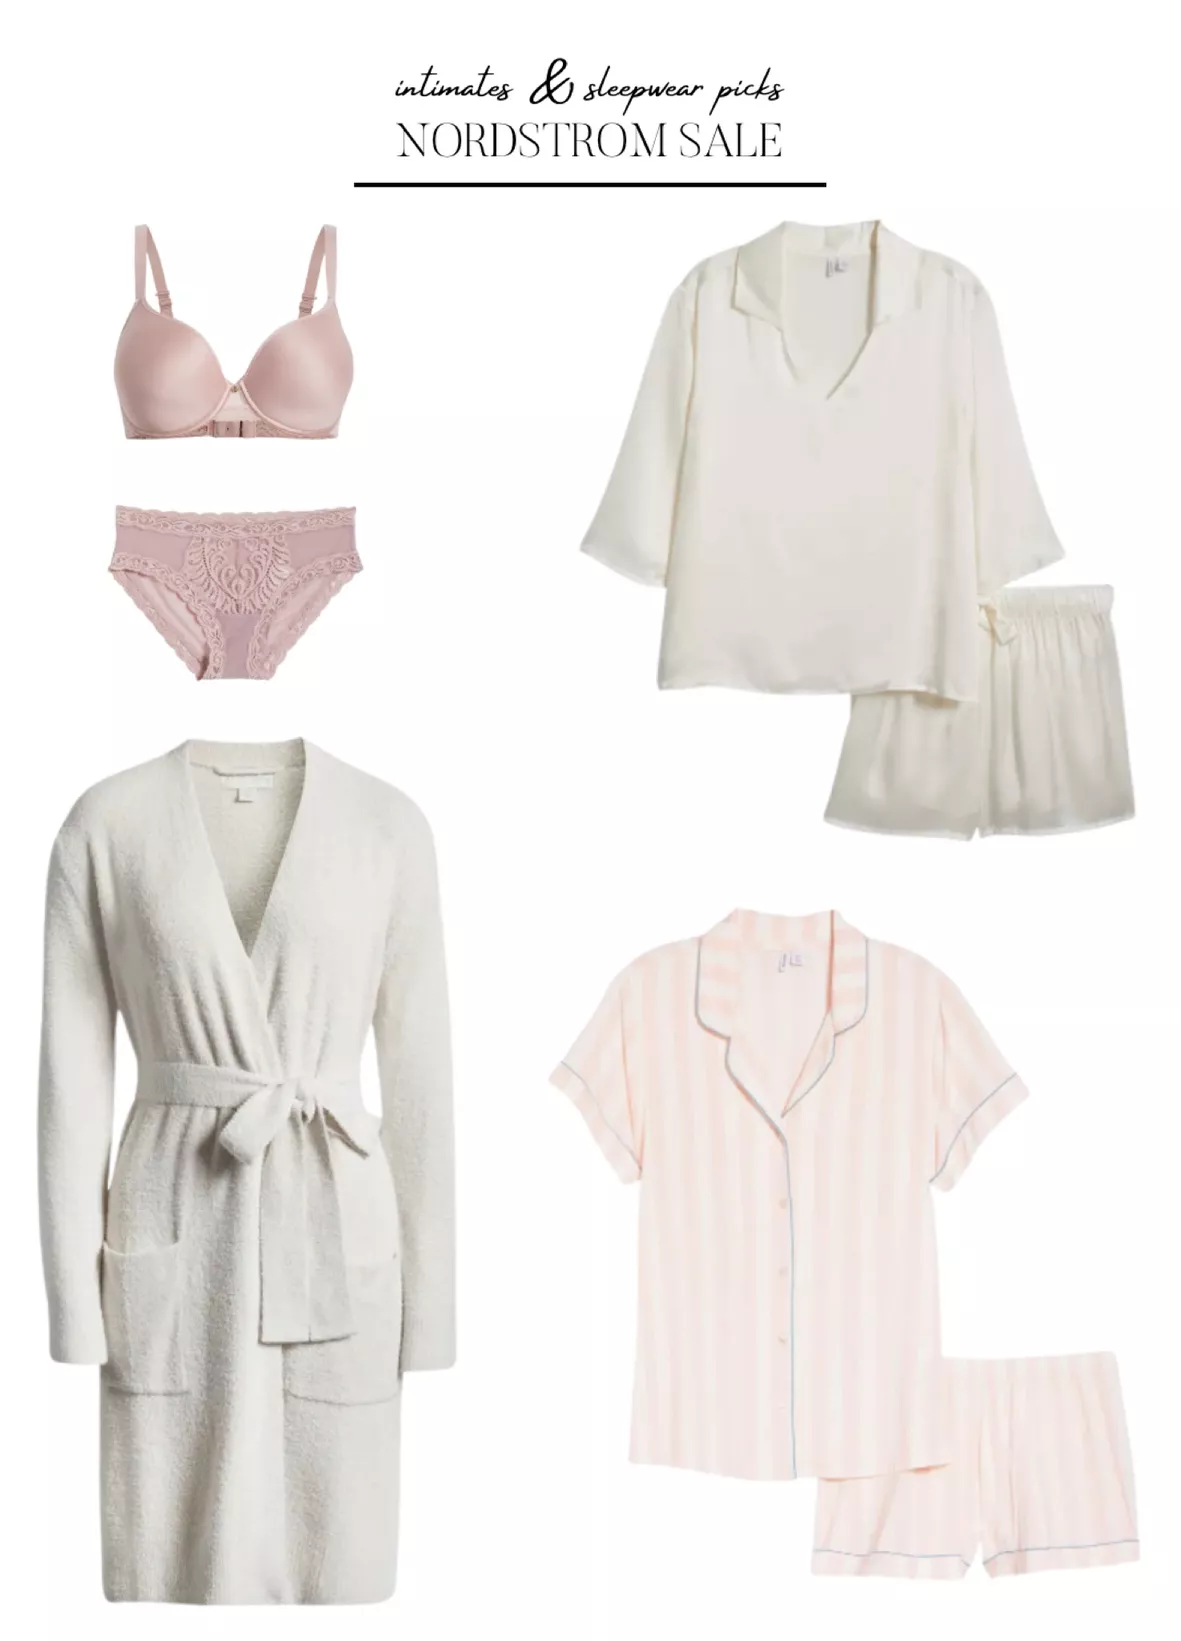 Nordstrom Anniversary Sale: Best pajamas, robes, and loungewear